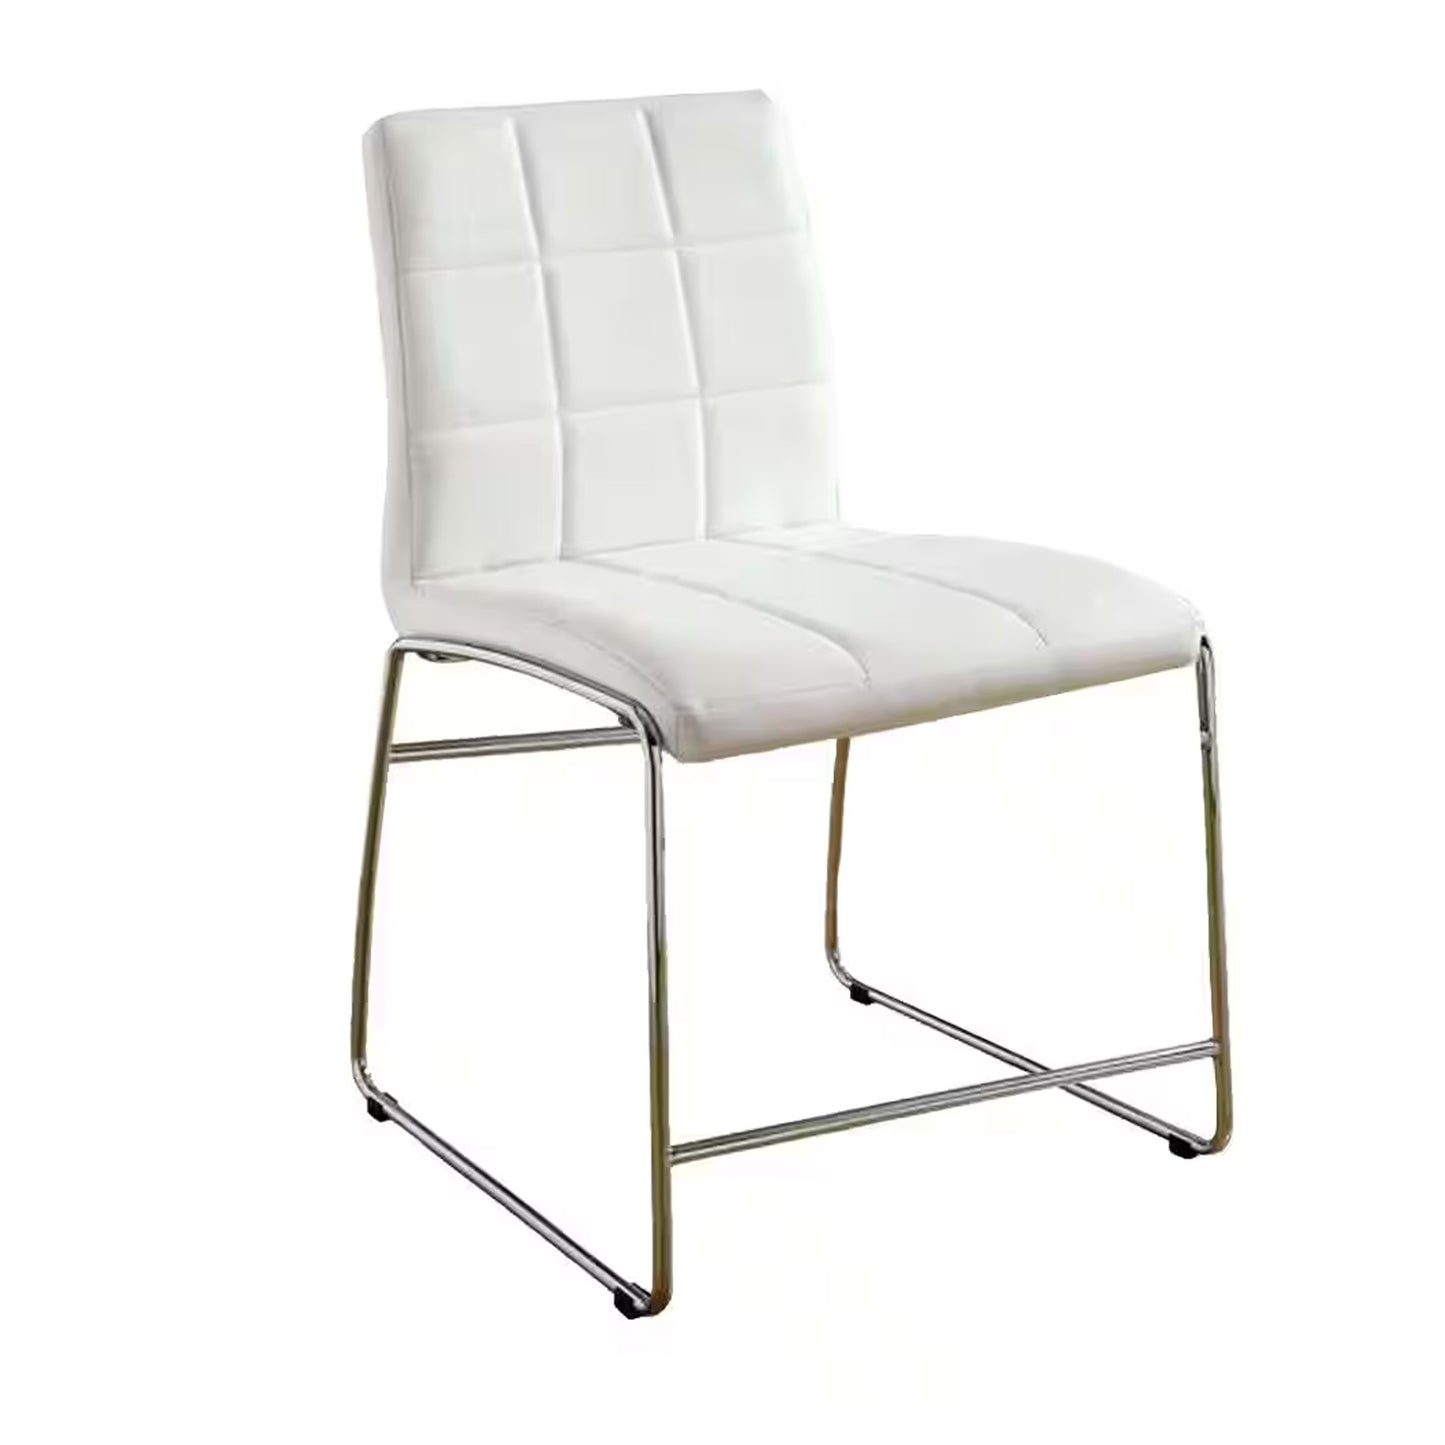 Kona II Contemporary Counter Height Chair, White Finish, Set of 2 - CM8320WH-PC-2PK